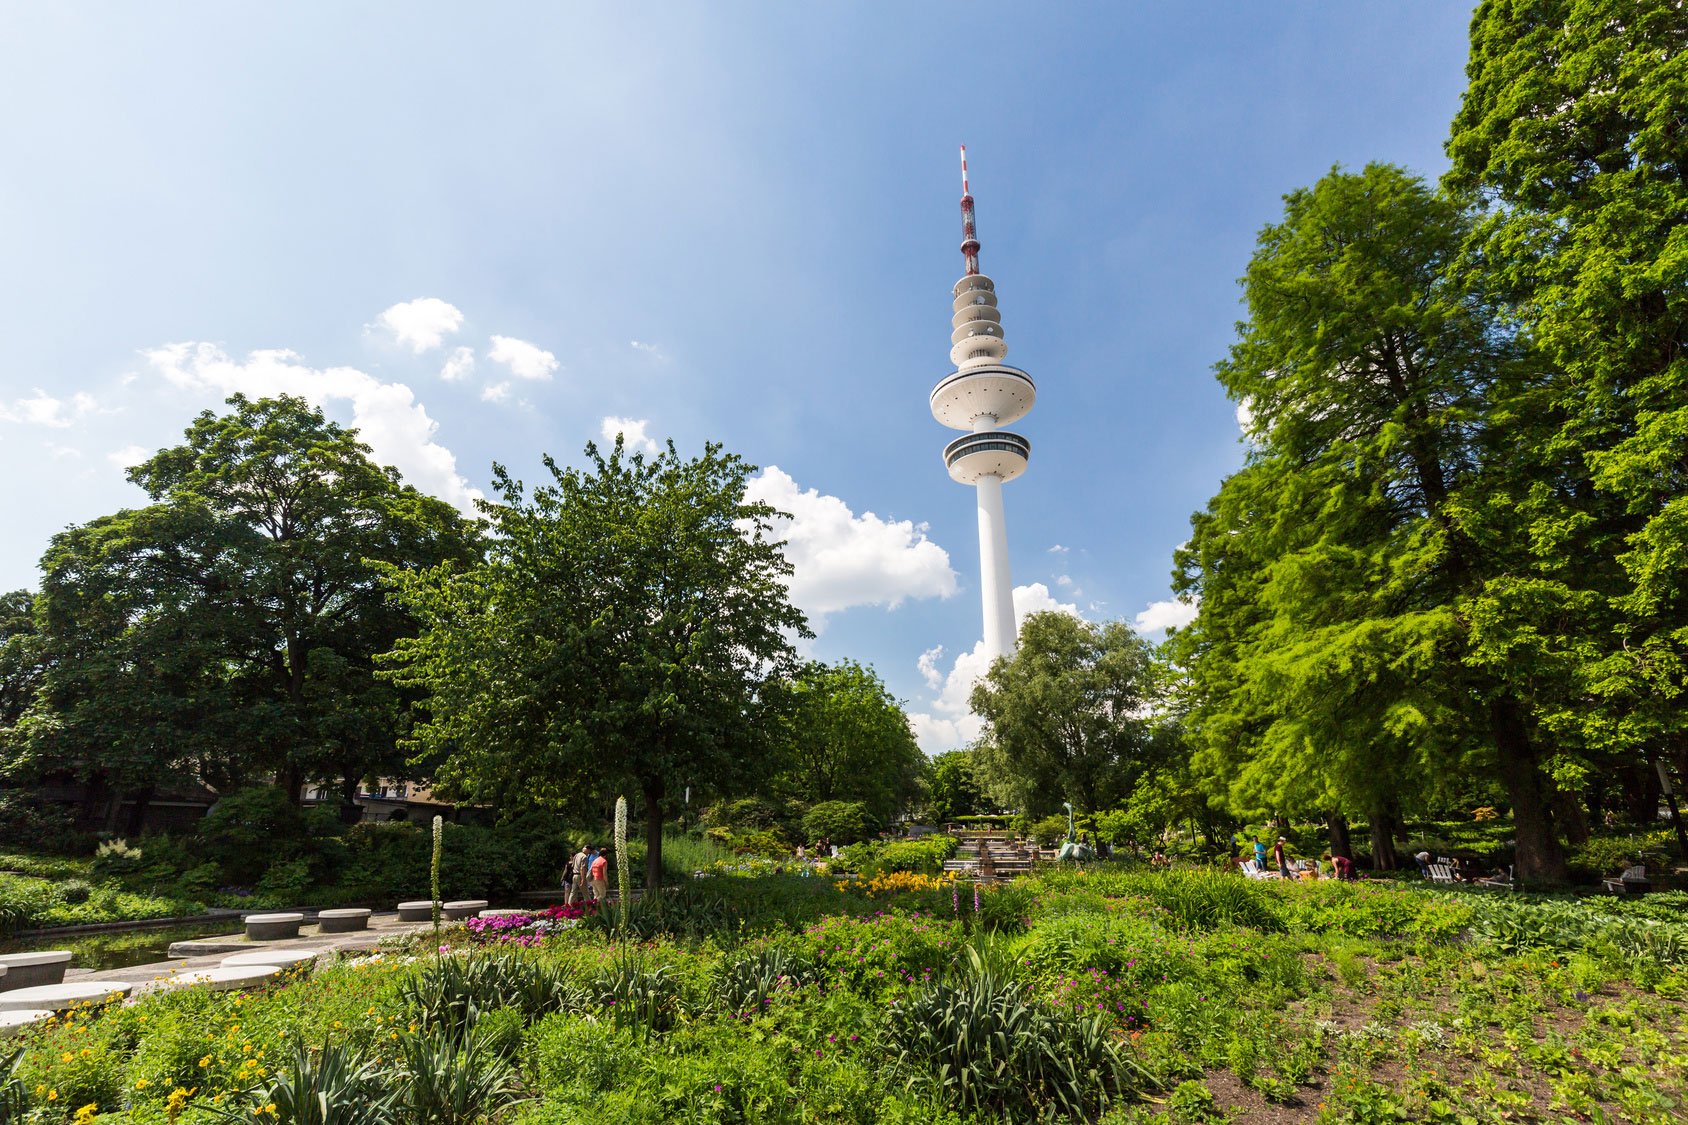 A sunny day at the city park in Hamburg with the TV tower in the back